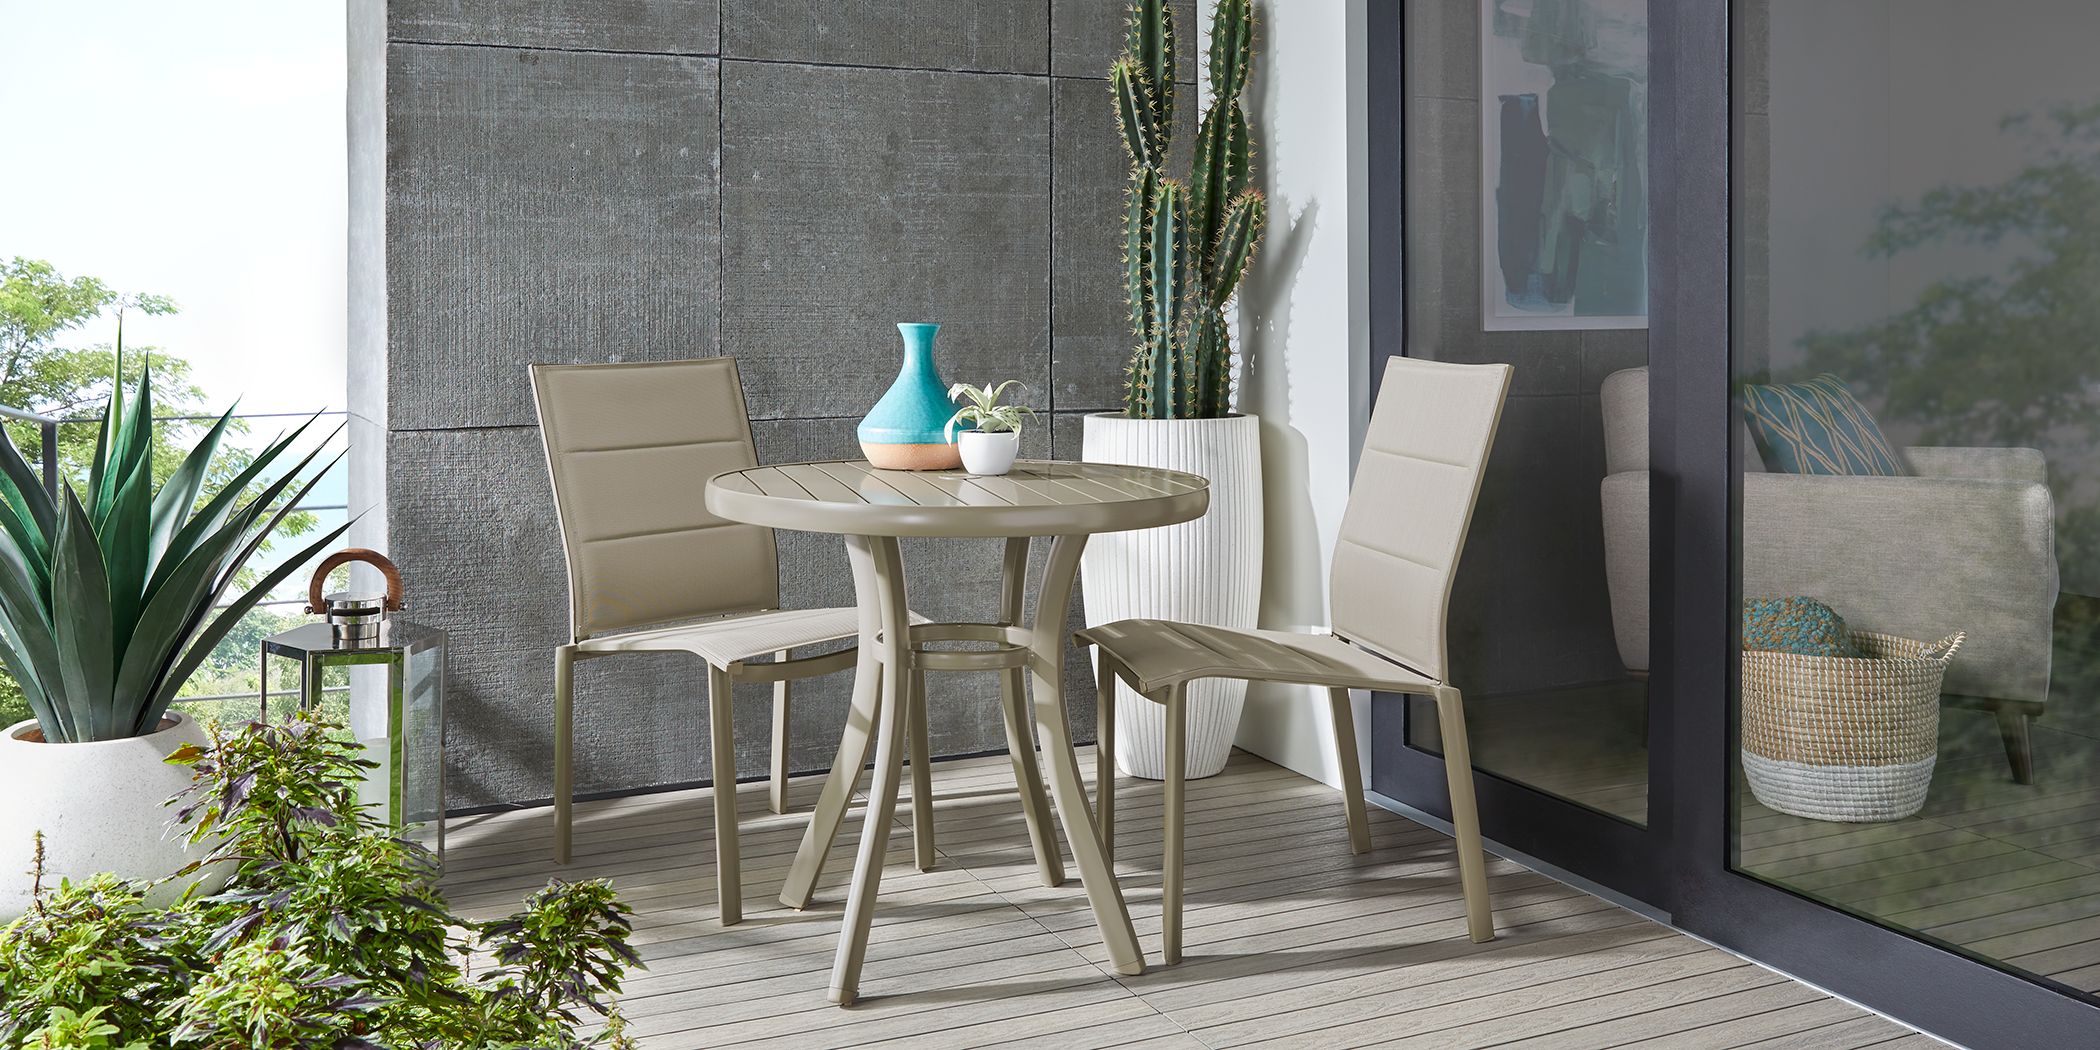 Solana Taupe 3 Pc Outdoor Dining Set